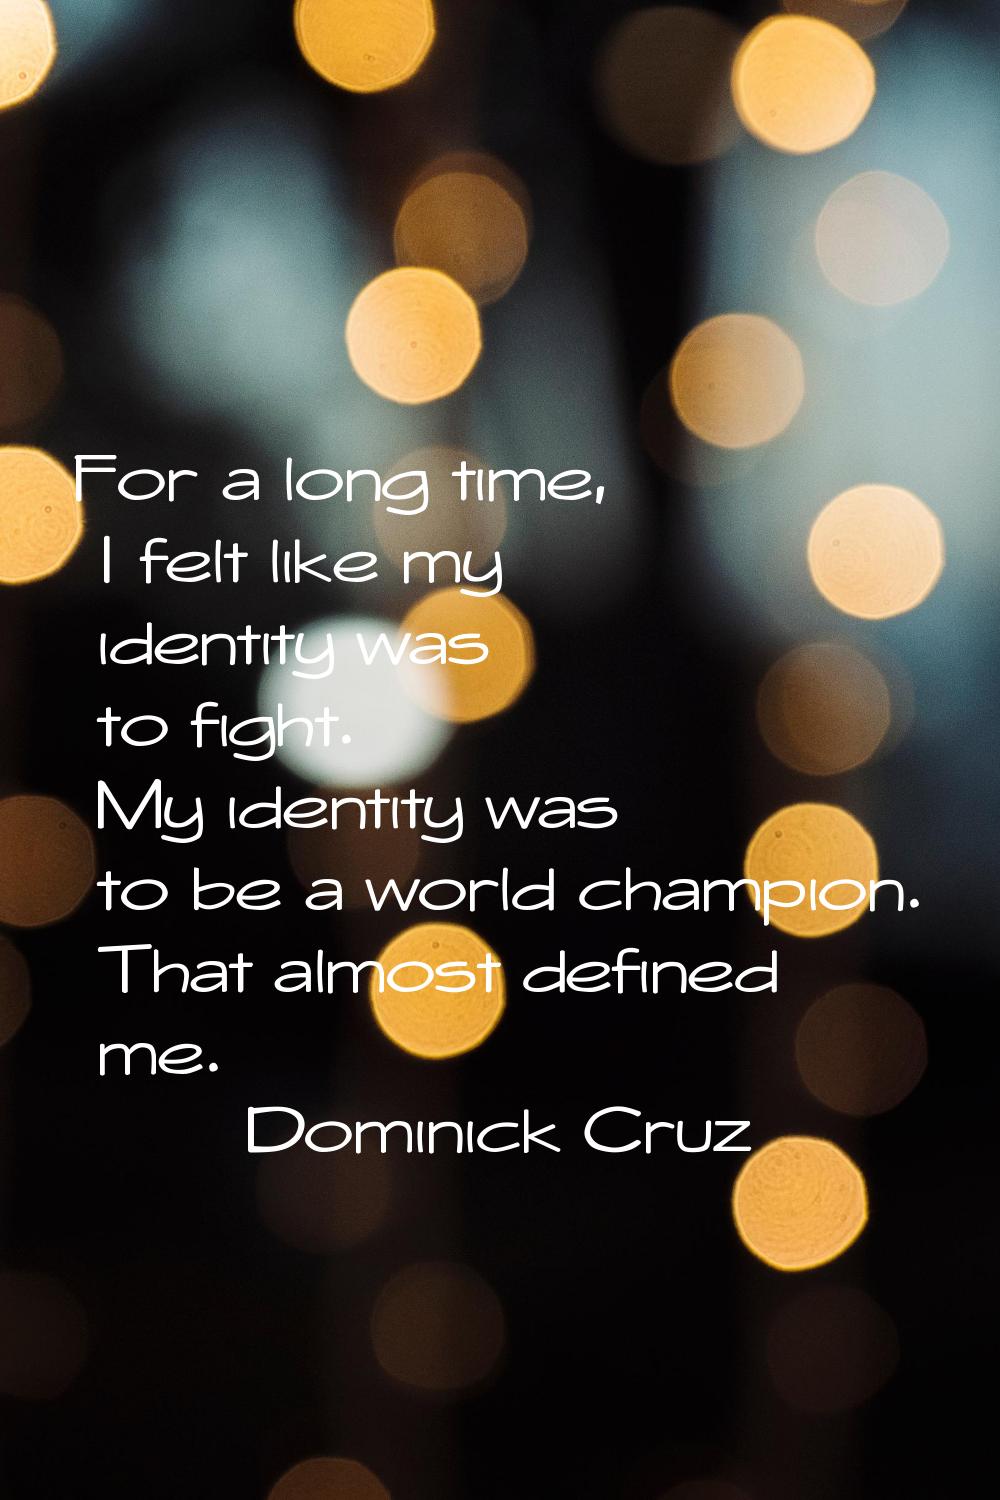 For a long time, I felt like my identity was to fight. My identity was to be a world champion. That